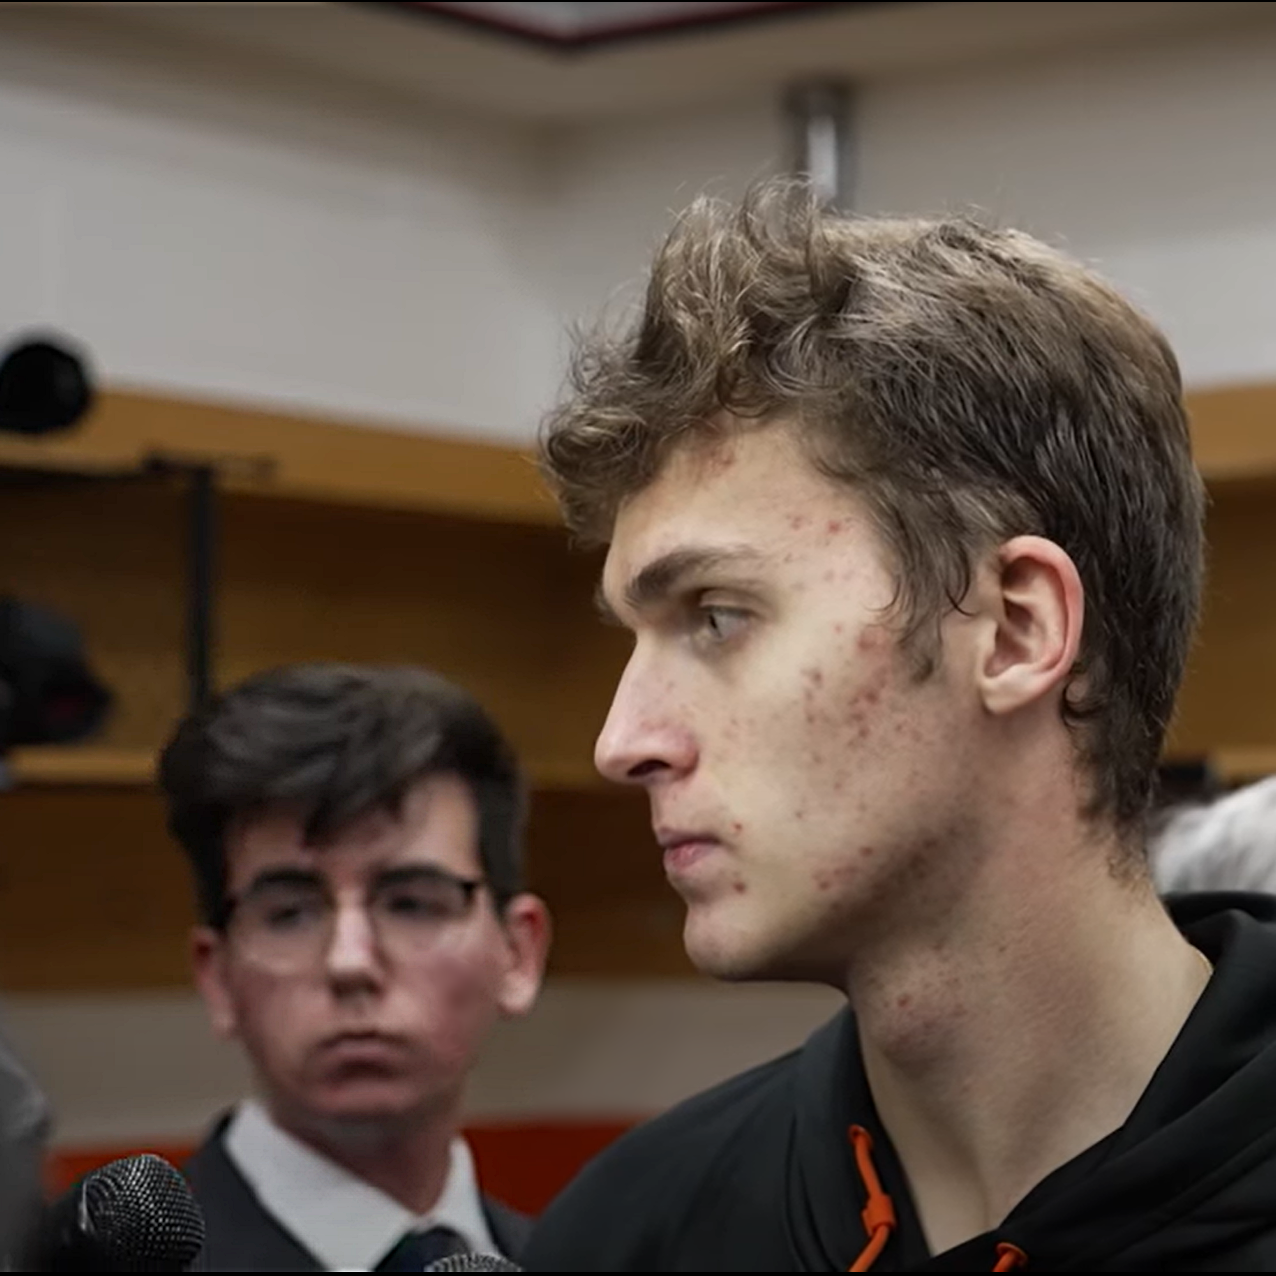 Cody, a white male with brown hair and glasses, wearing a white shirt, dark tie, and dark colored blazer, stands behind Philadelphia Flyers defenseman Egor Zaumula during a postgame media scrum in the Philadelphia locker room at Wells Fargo Center in Philadelphia, Pennsylvania.